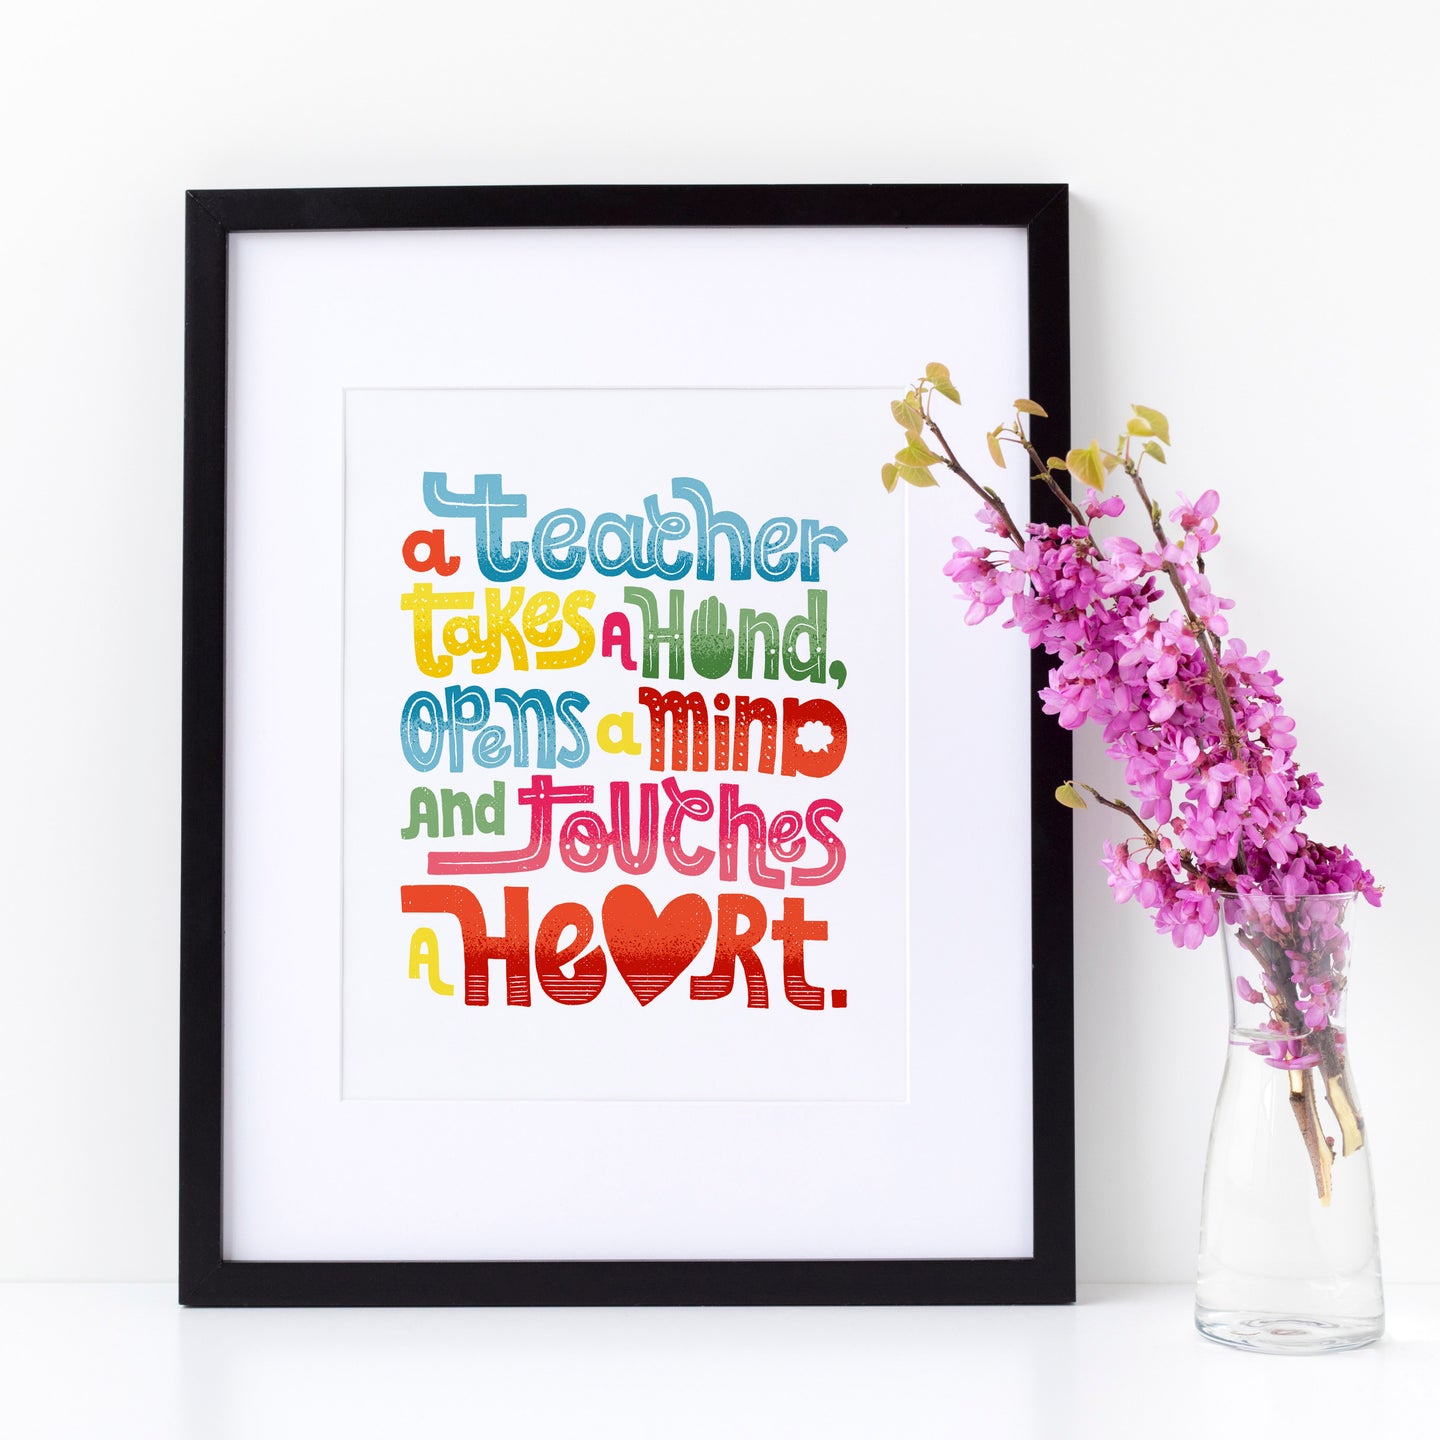 A framed print with the phrase “A teacher takes a hand, opens a mind and touches a heart.” The words are from hand lettered art and are in colorful colors. The word heart features a heart shape in place of the “a.”